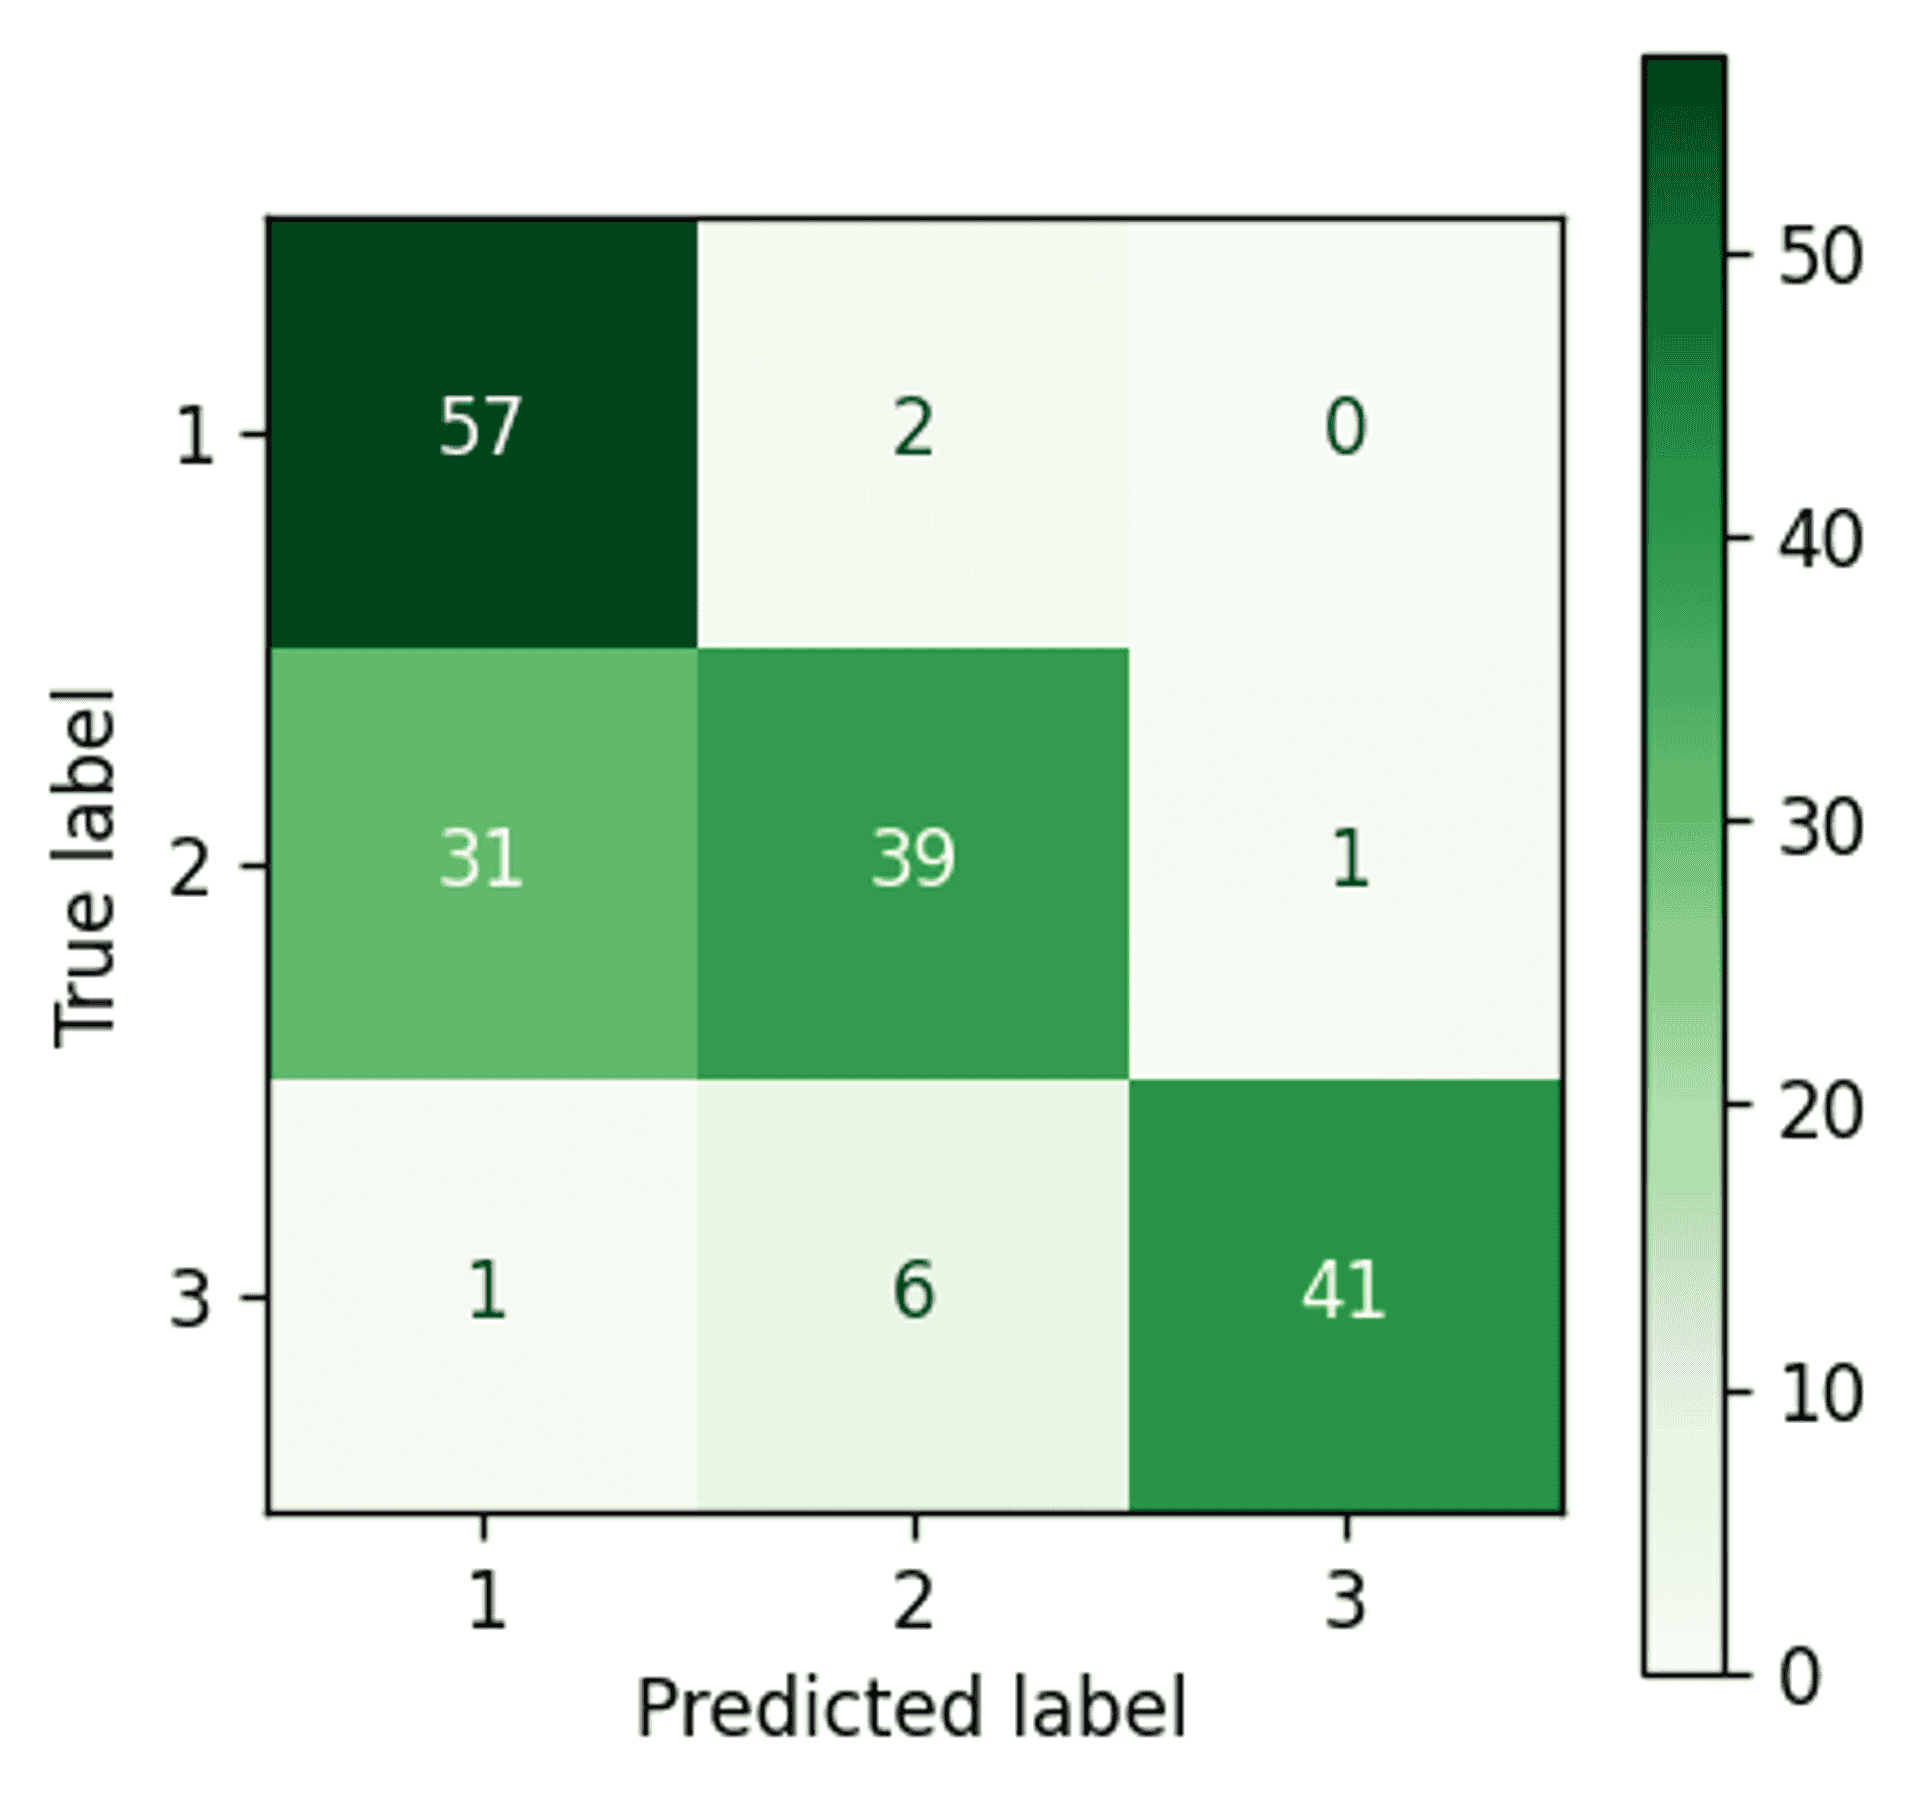 Confusion matrix for the Gaussian Mixture Model — Reduced features